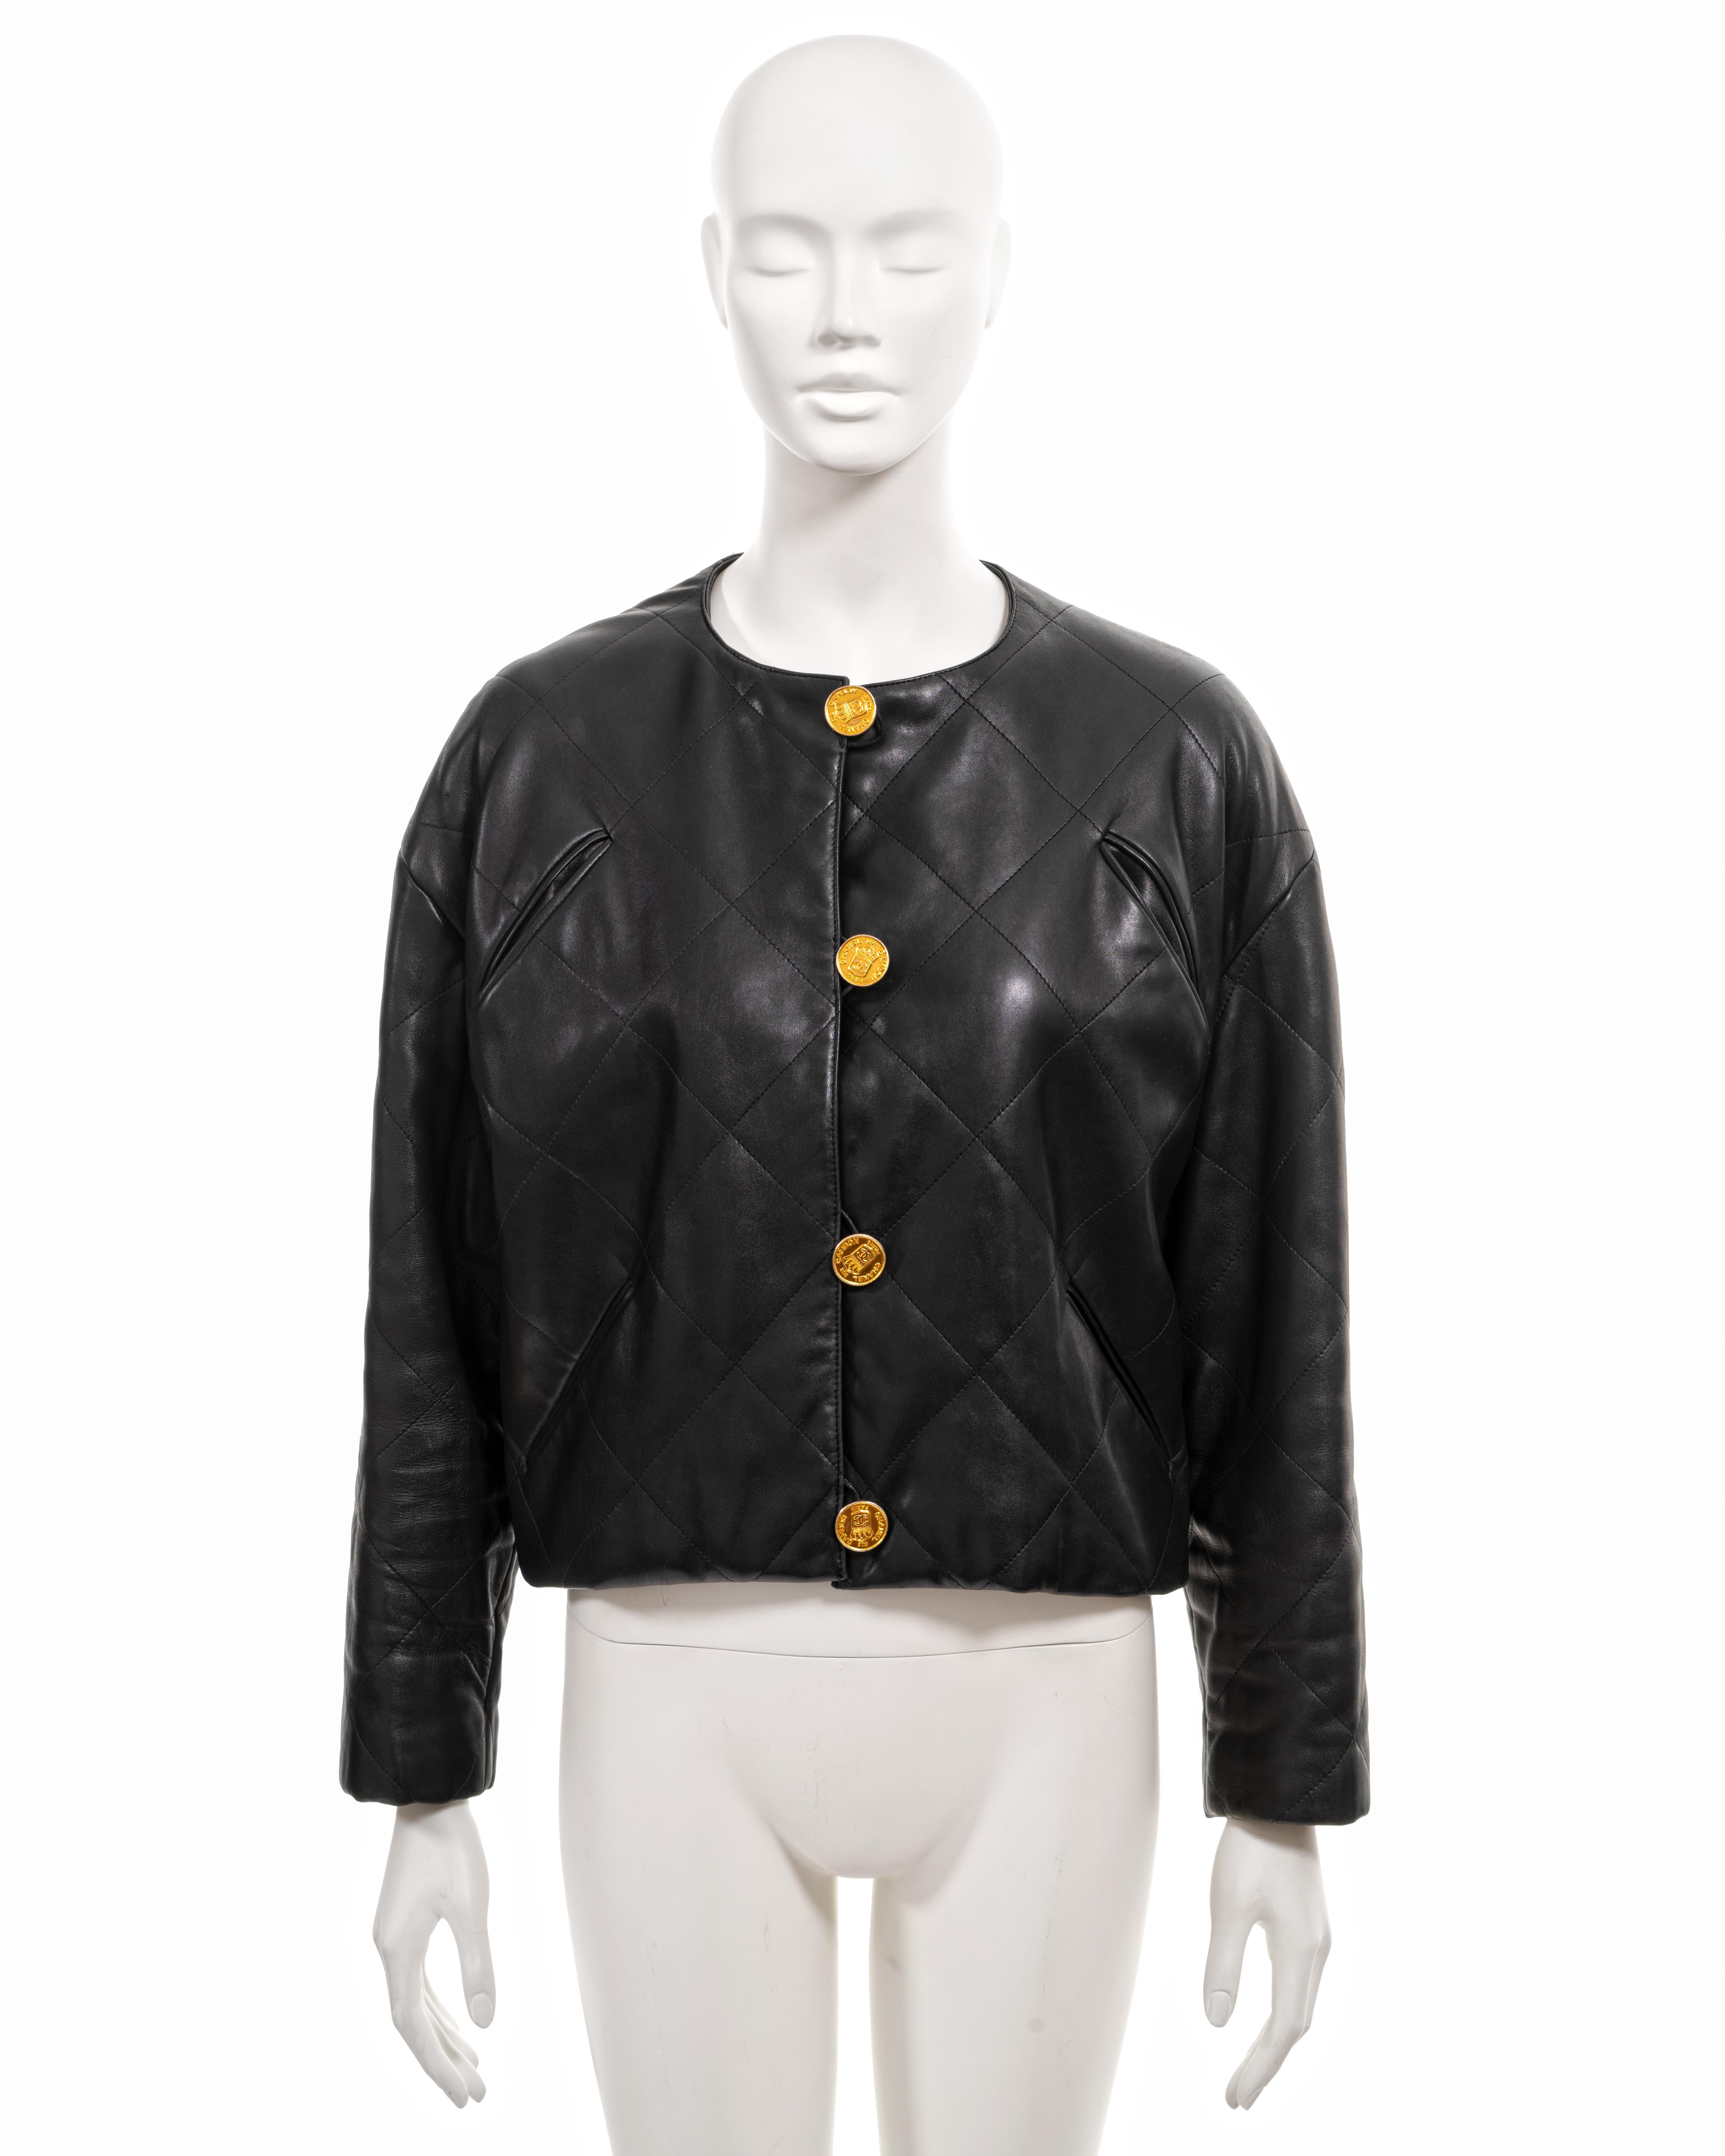 ▪ Chanel vintage leather jacket
▪ Creative Director: Karl Lagerfeld
▪ Fall-Winter 1987
▪ Sold by One of a Kind Archive
▪ Constructed from black quilted lambskin leather 
▪ Dropped shoulder 
▪ Wide cut 
▪ Gold coin-style Chanel buttons 
▪ Silk lining